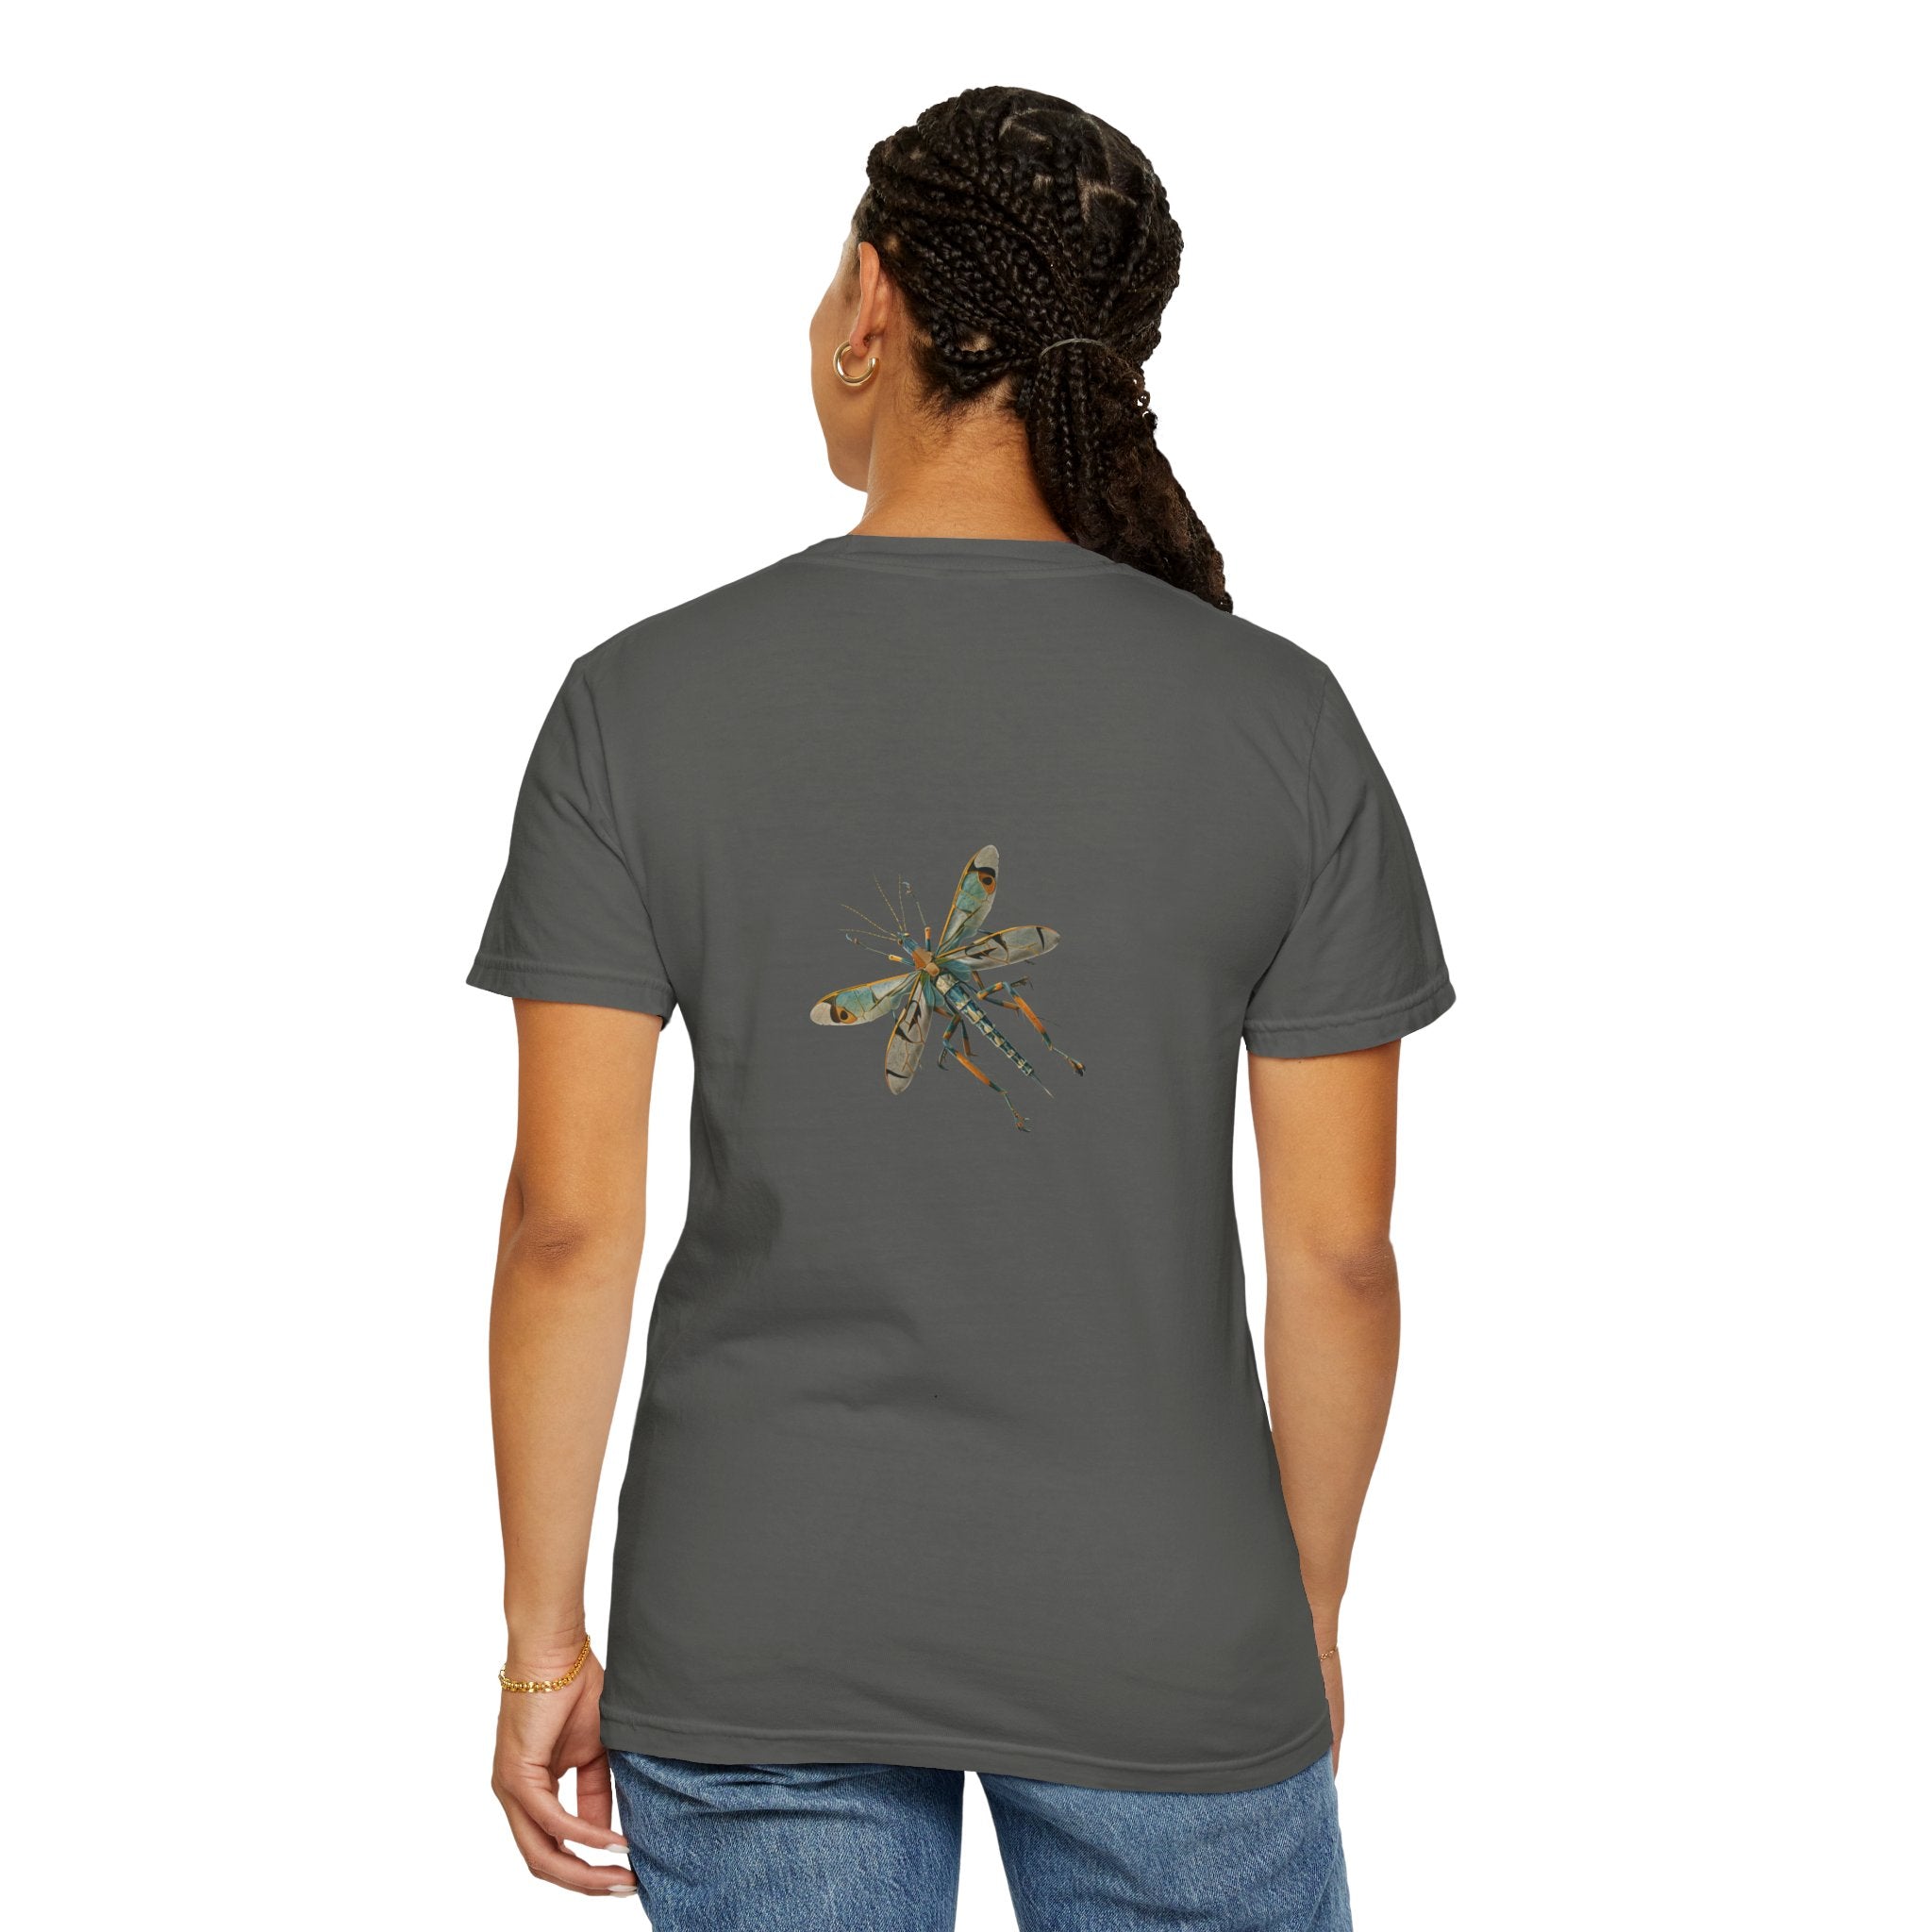 Humorous back bug t-shirt, unisex prank tee, garment-dyed funny shirt, realistic bug illustration top, casual conversation starter tee, quirky unisex garment, playful bug on back shirt, funny gift idea t-shirt, soft vintage look tee, comfortable humorous clothing, durable prank shirt, cheeky bug design t-shirt, no-shrink fun tee, lightweight humorous top, social event funny shirt